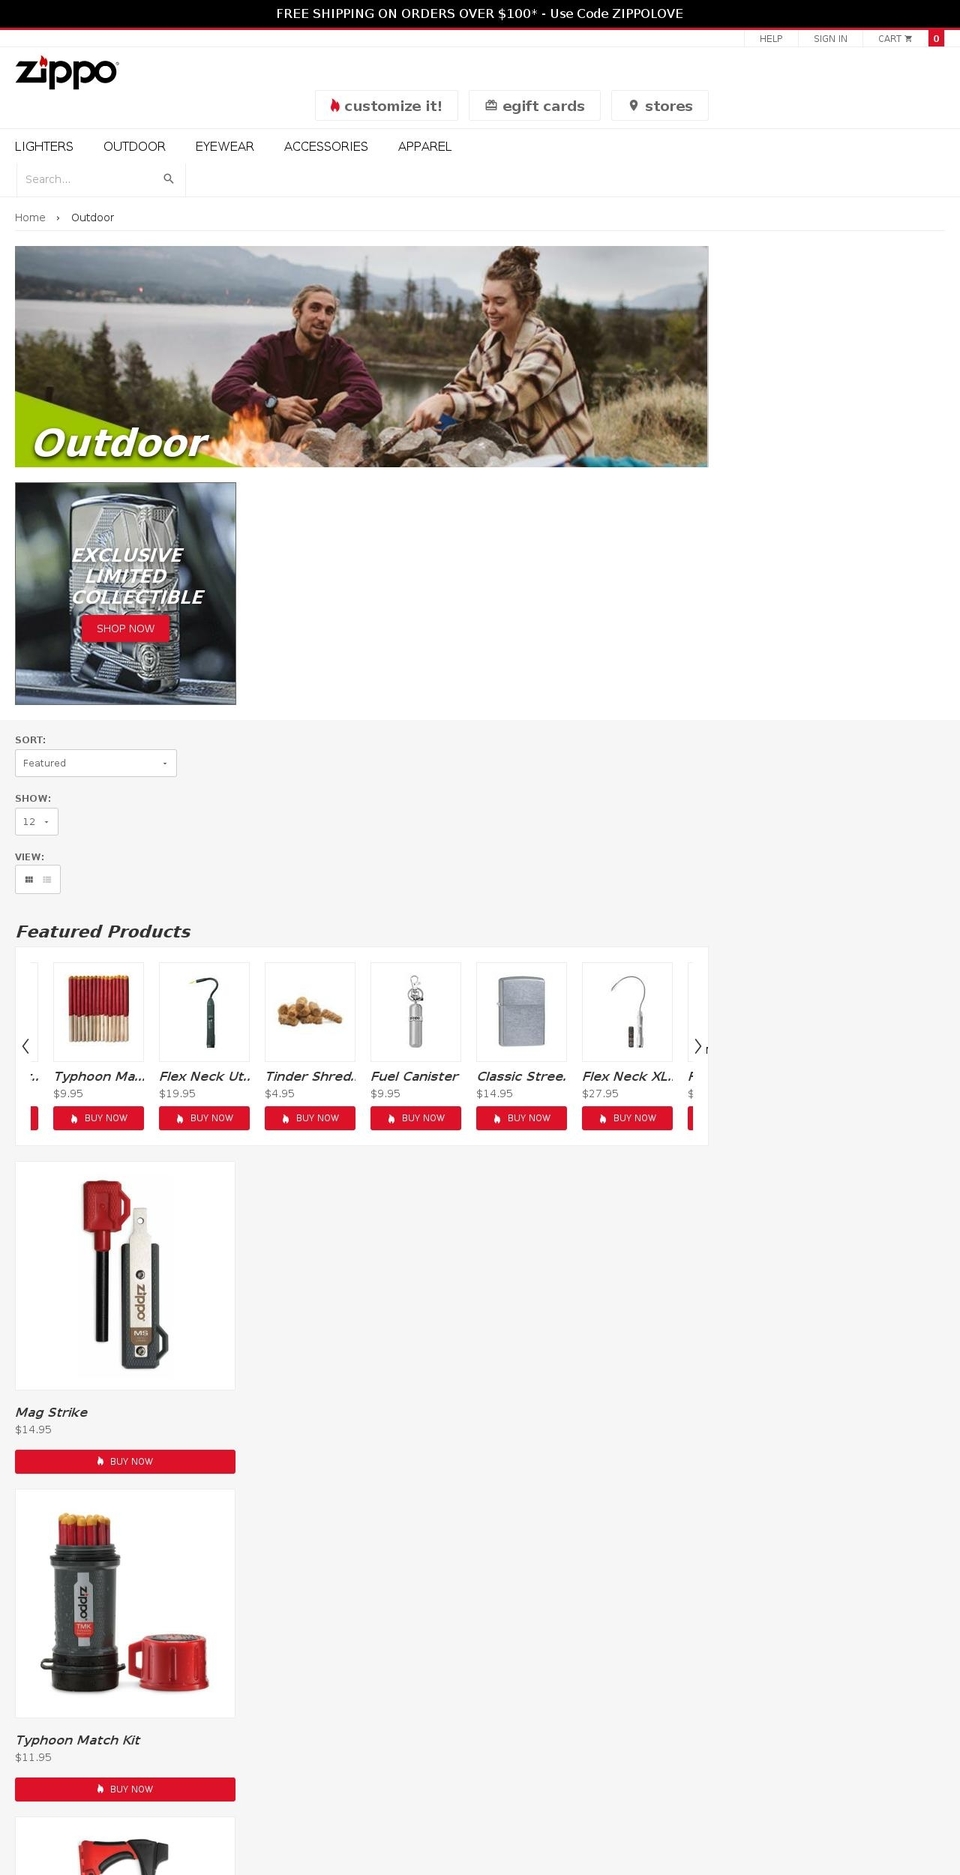 Shopify Checkout Update - 7\/16\/18 Shopify theme site example zippooutdoor.com